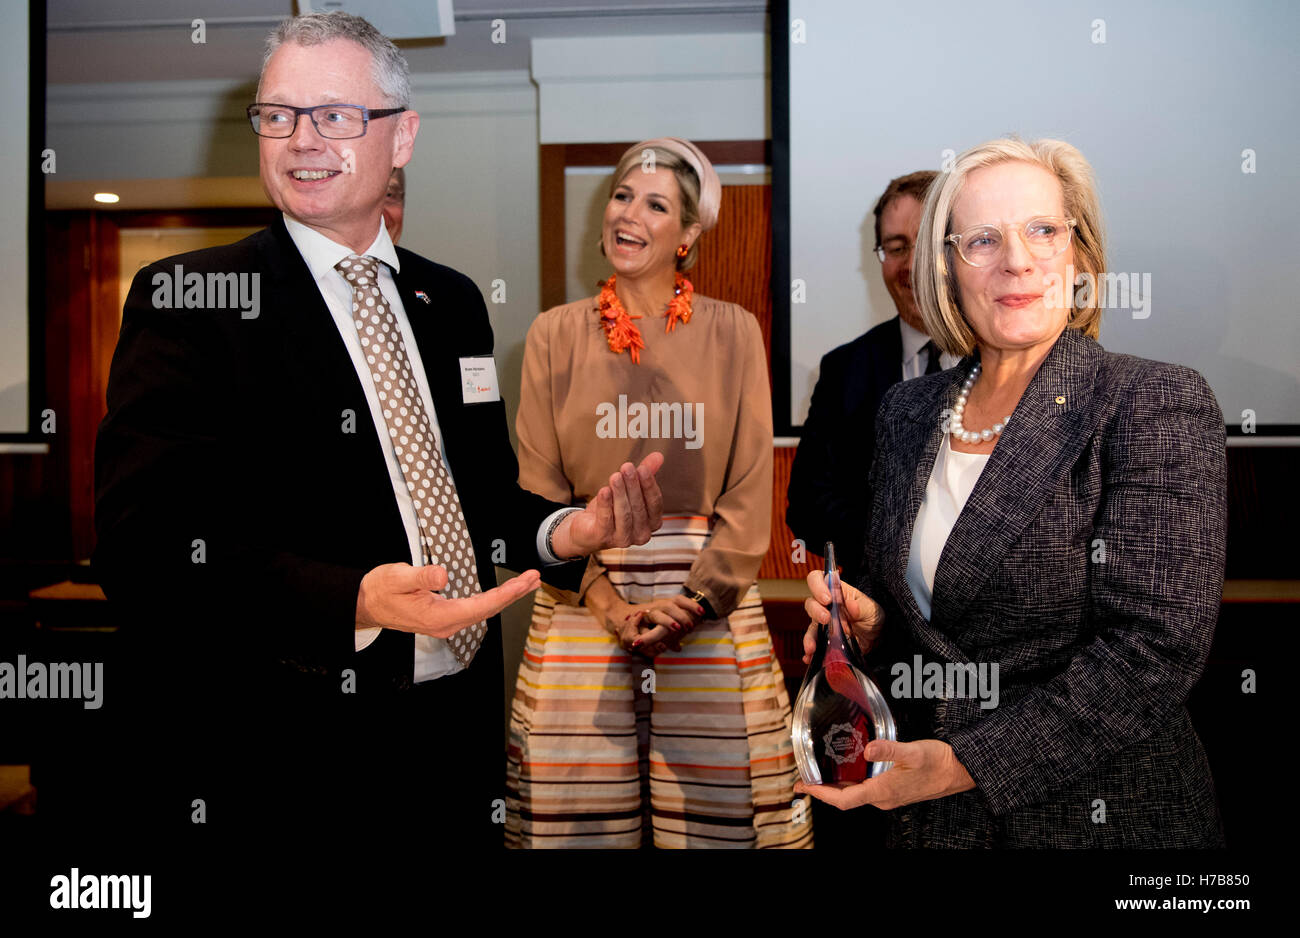 Sydney, Australia. 3rd Nov, 2016. Queen Maxima of the Netherlands attends the Smart Cities Summit hosted by director Budde at the Four Seasons Hotel in Sydney, Australia, 3 November 2016. The Queen also attend the MoU signing ceremony between Global Smart City and Community Coalition from The Netherlands, The Australian Smart Communities Association and four Australian cities (Sydney, Adelaide, Ipswich and Newcastle). The Dutch King and Queen are in Australia for an 5 day state visit. Photo: Patrick van Katwijk /POINT DE VUE OUT - NO WIRE SERVICE -/dpa/Alamy Live News Stock Photo